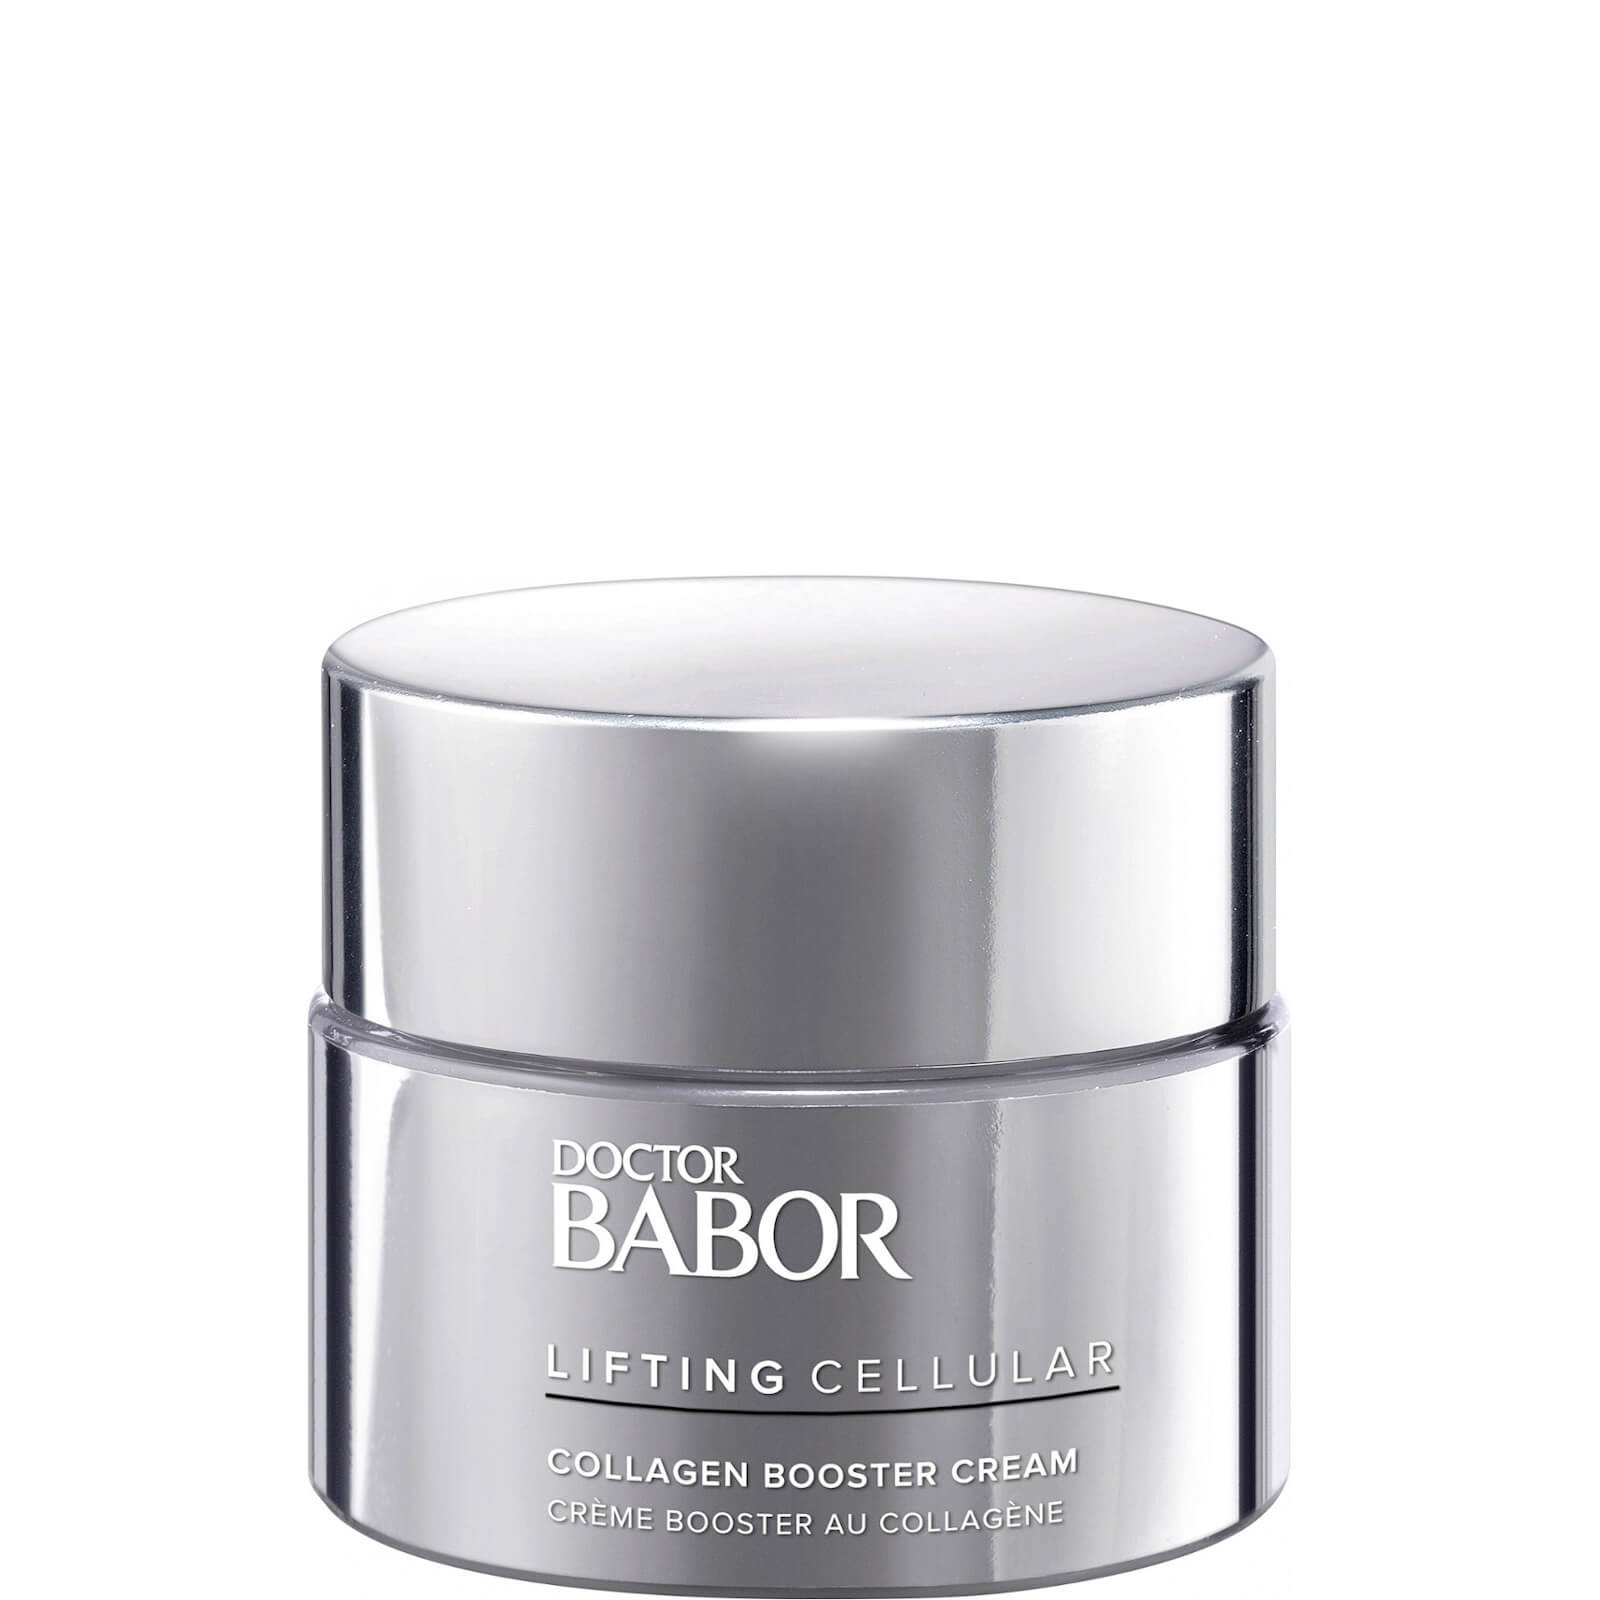 BABOR Doctor Lifting Cellular Collagen Booster Cream 50ml